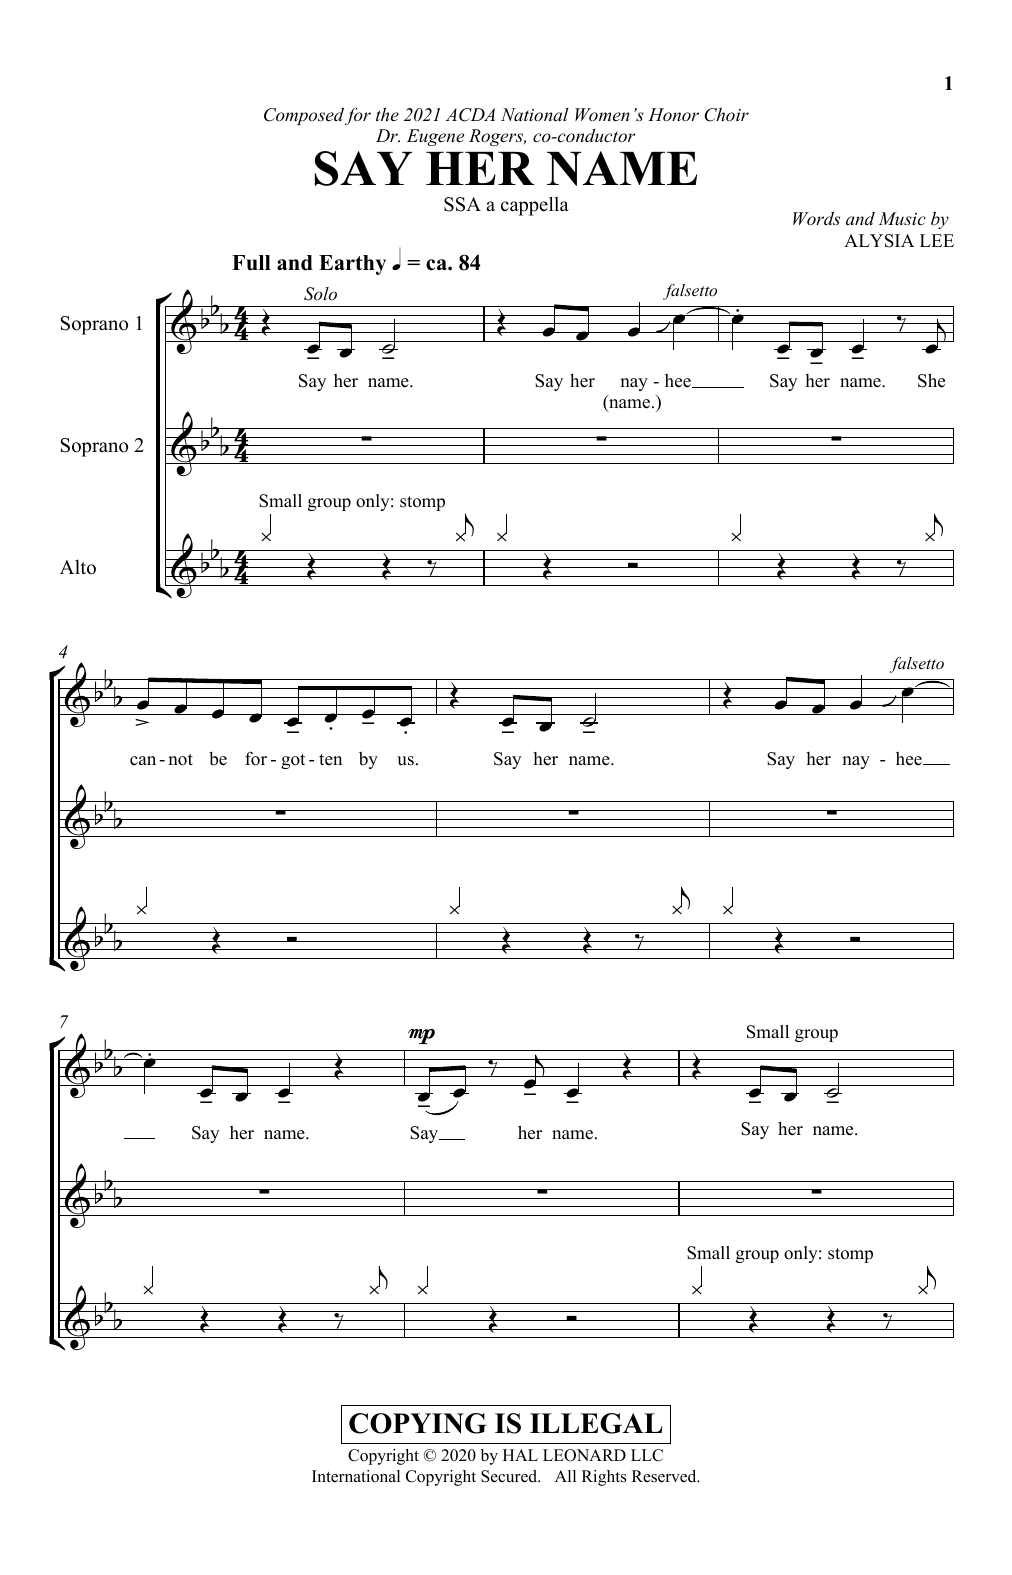 Download Alysia Lee Say Her Name Sheet Music